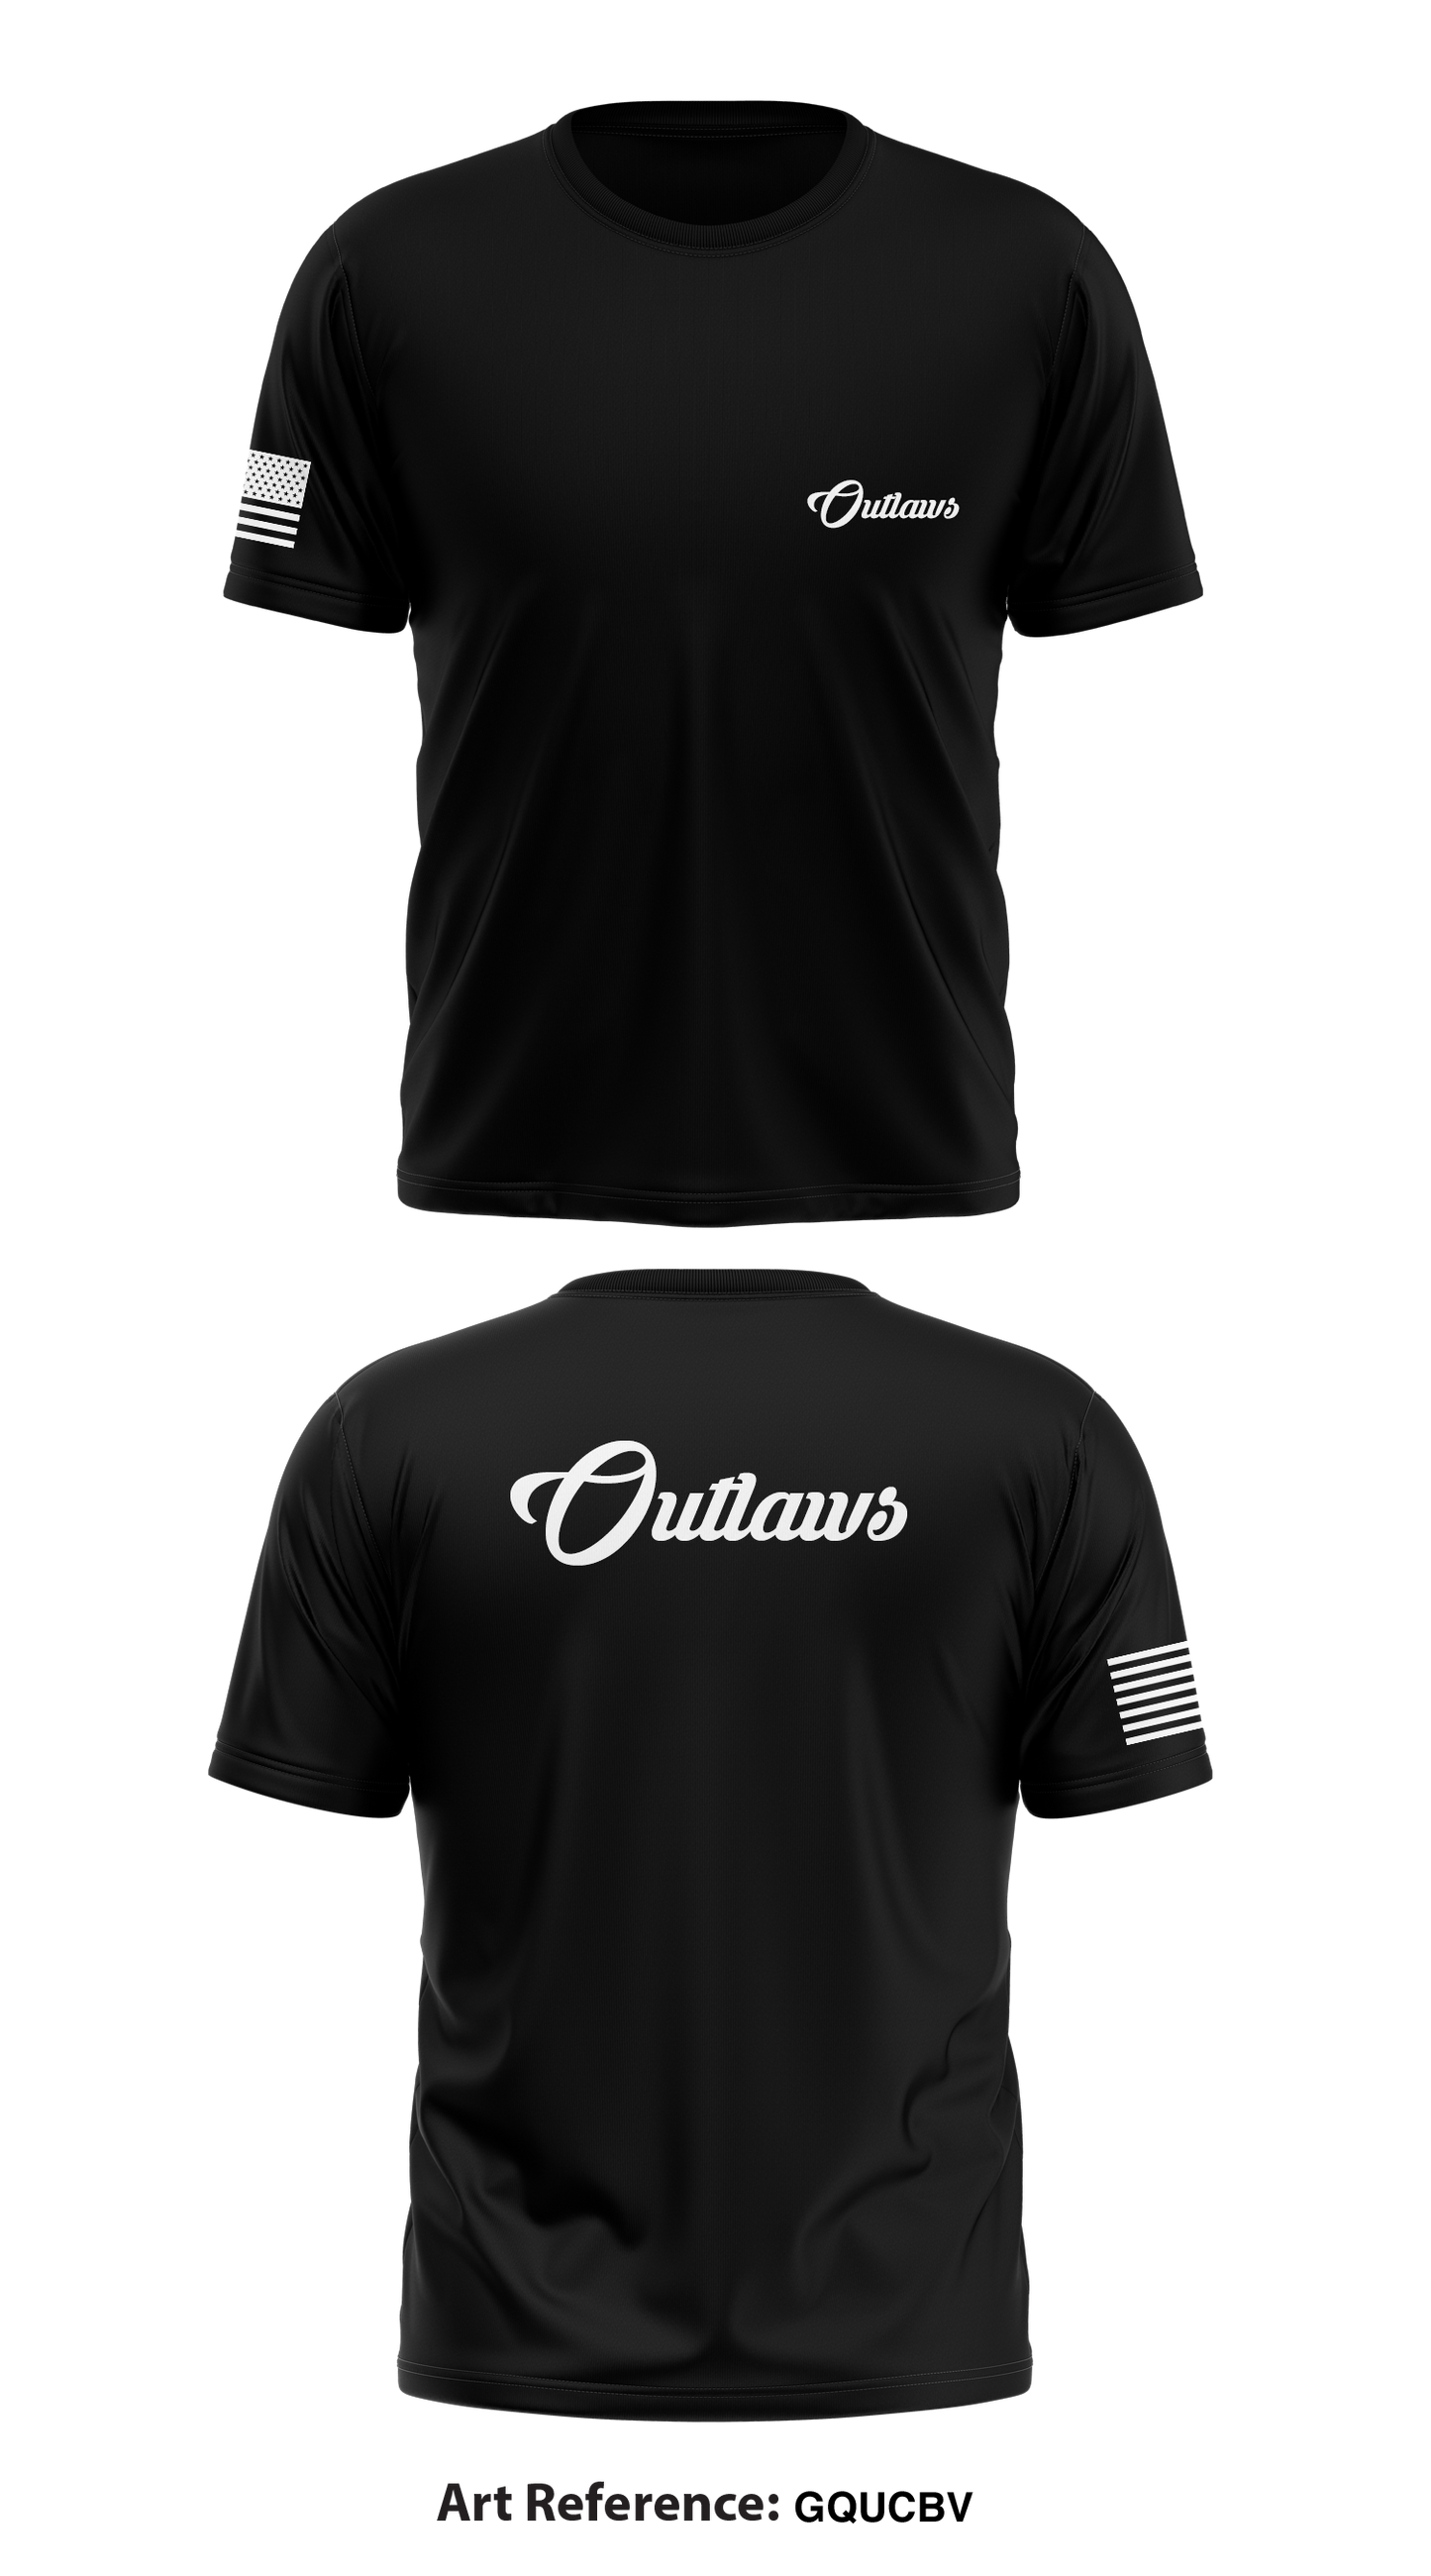 Outlaws Store 6 Core Men's SS Performance Tee - gqUCbV